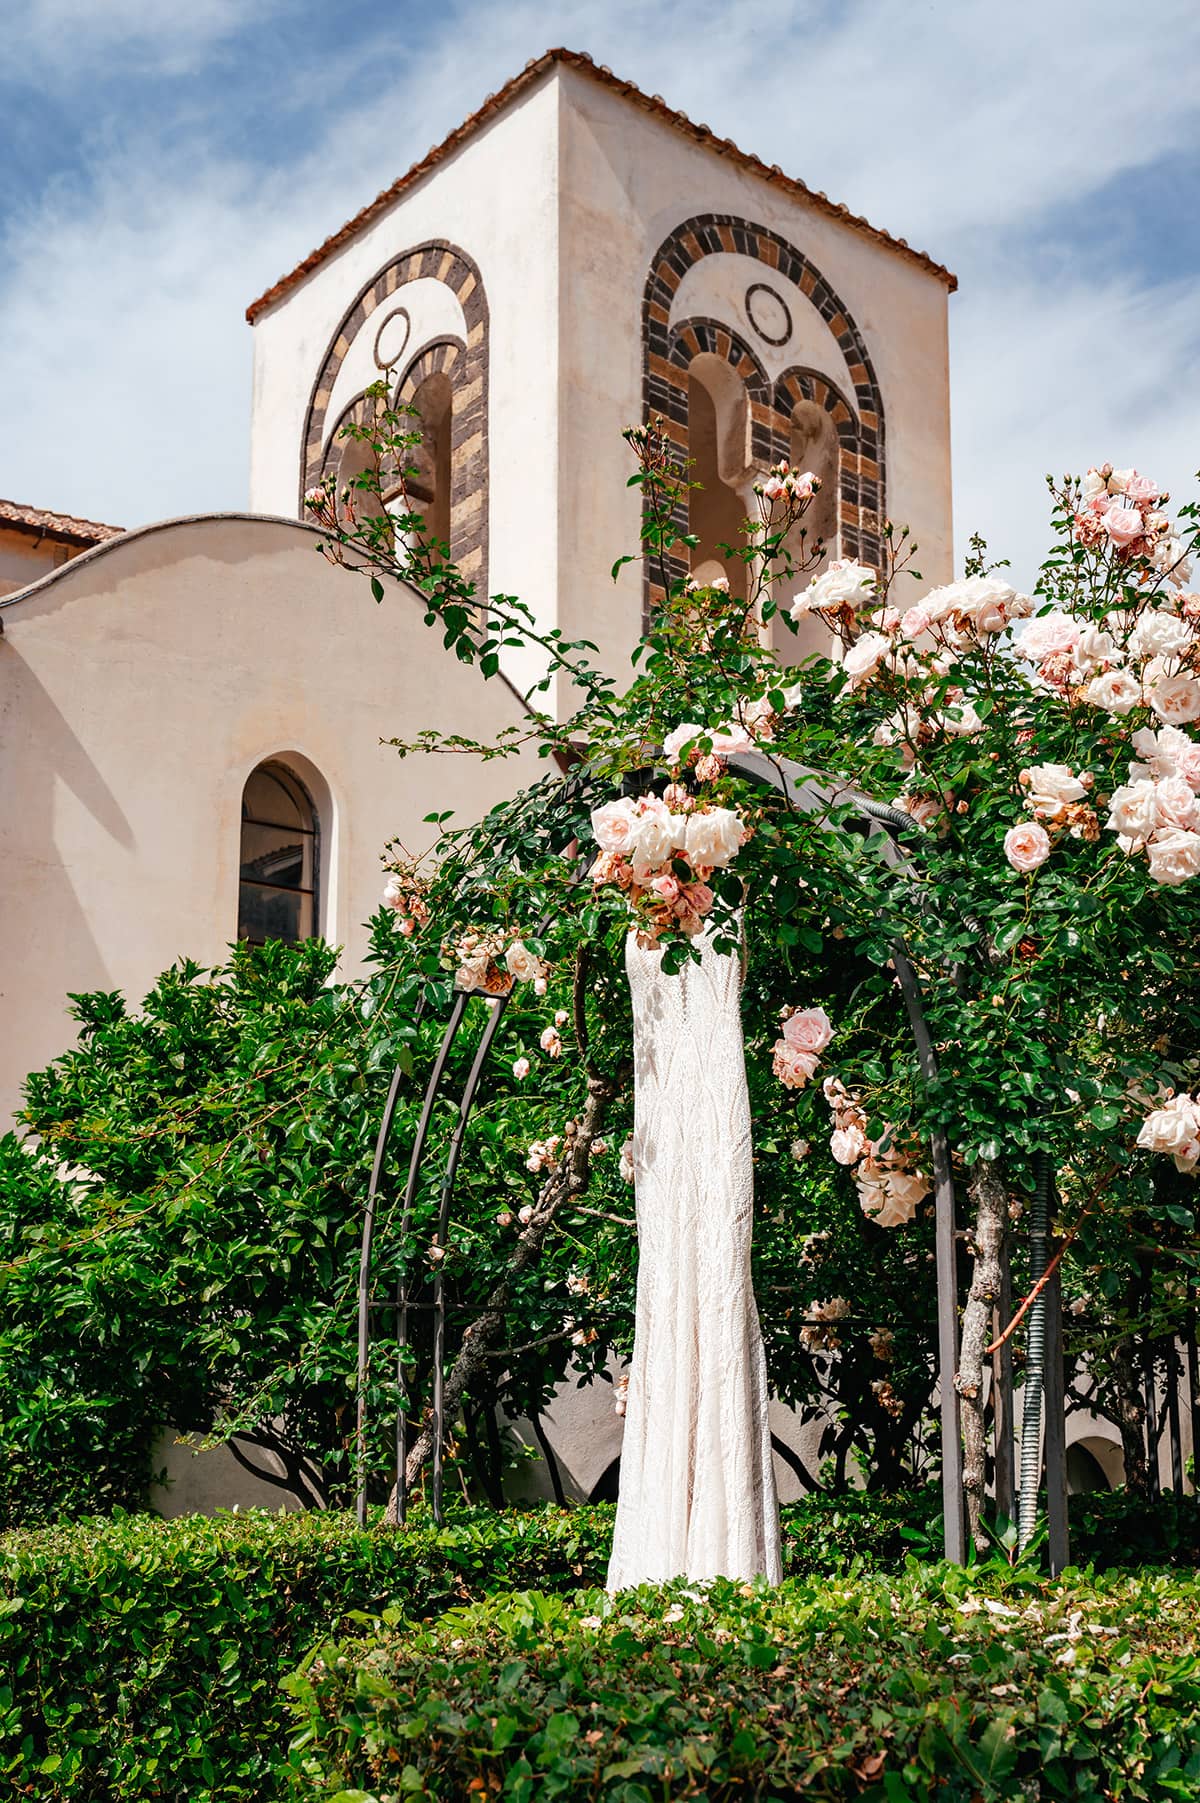 Belmond Hotel Caruso | Emiliano Russo | Belmond Caruso Wedding emiliano russo ravello wedding photographer 2 2 | A successful Wedding is the result of many factors. Belmond Caruso Wedding: a mix of elegance, charm and glamour and the best services you can dream of for a Big Day in style.